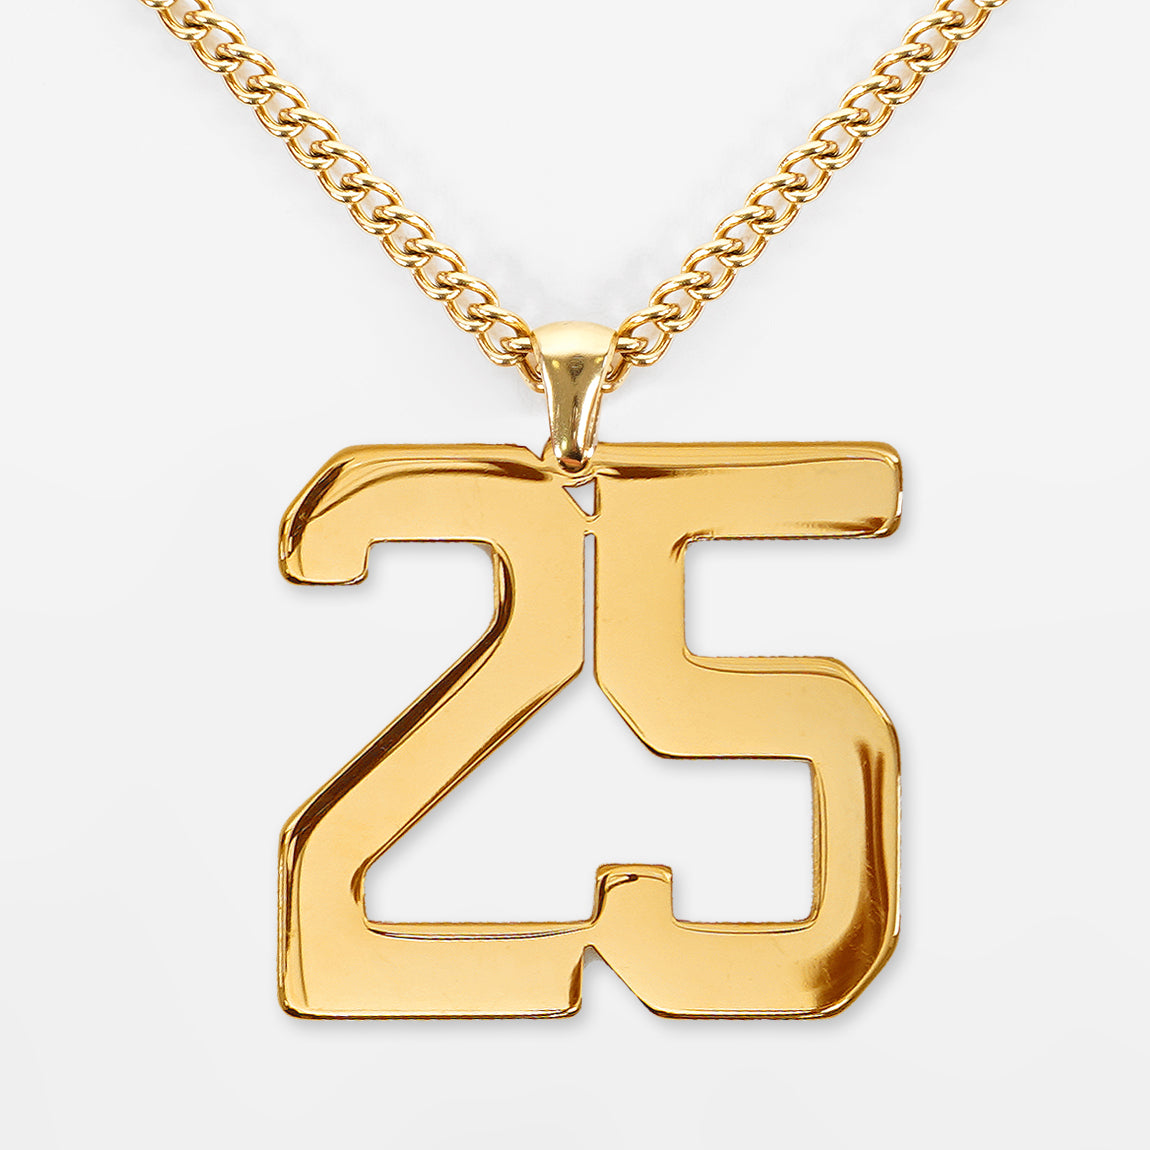 25 Number Pendant with Chain Necklace - Gold Plated Stainless Steel